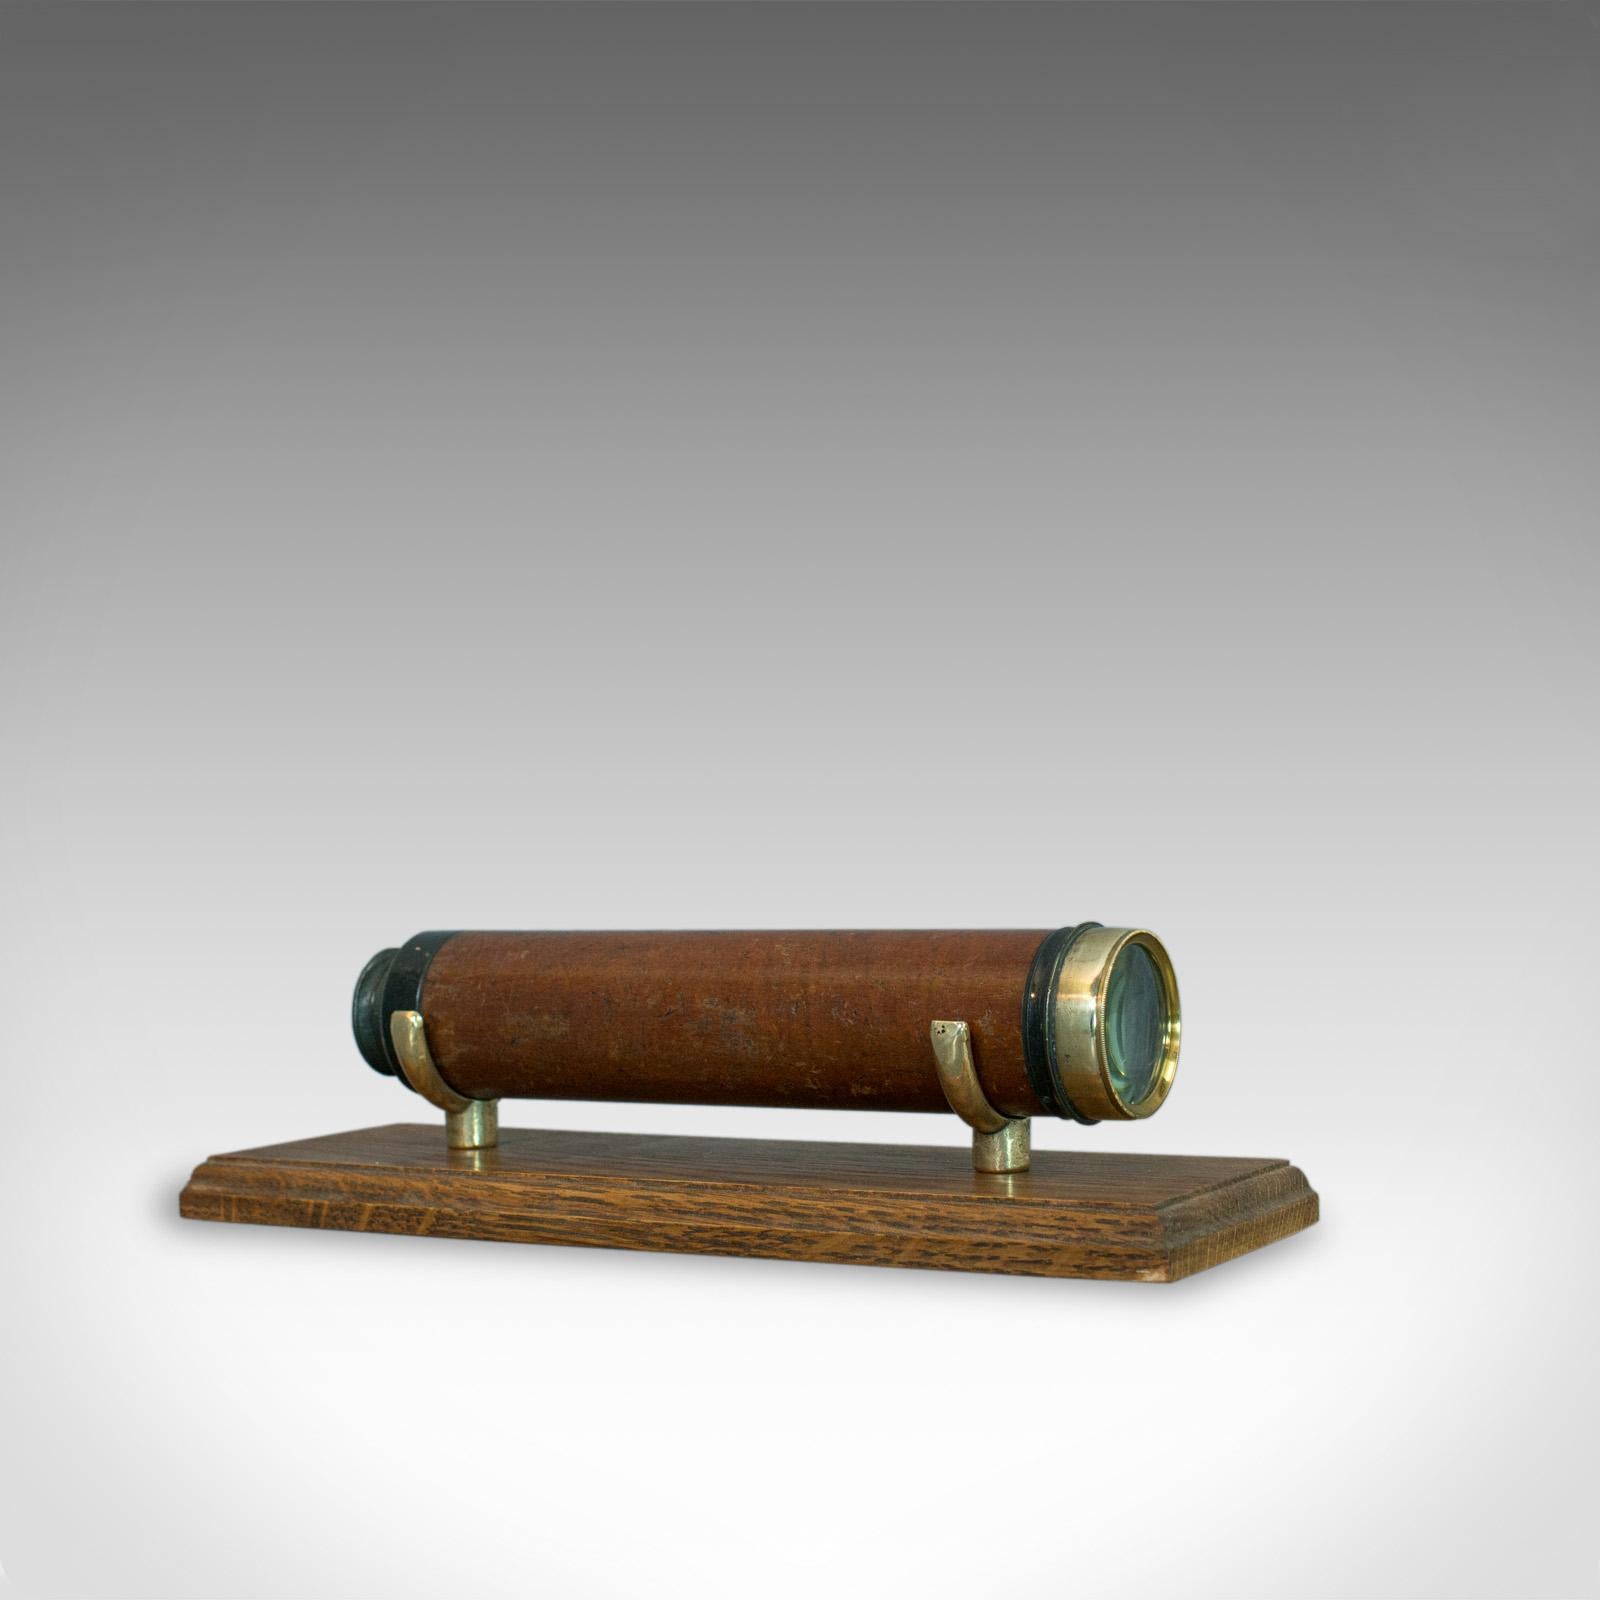 Antique telescope, Bancks and Son, English, 3-draw, late 18th century, circa 1800 this is an antique telescope, engraved Bancks and Son. An English three-draw refractor dating to the late 18th century, circa 1800.

Perfect for bird watching,